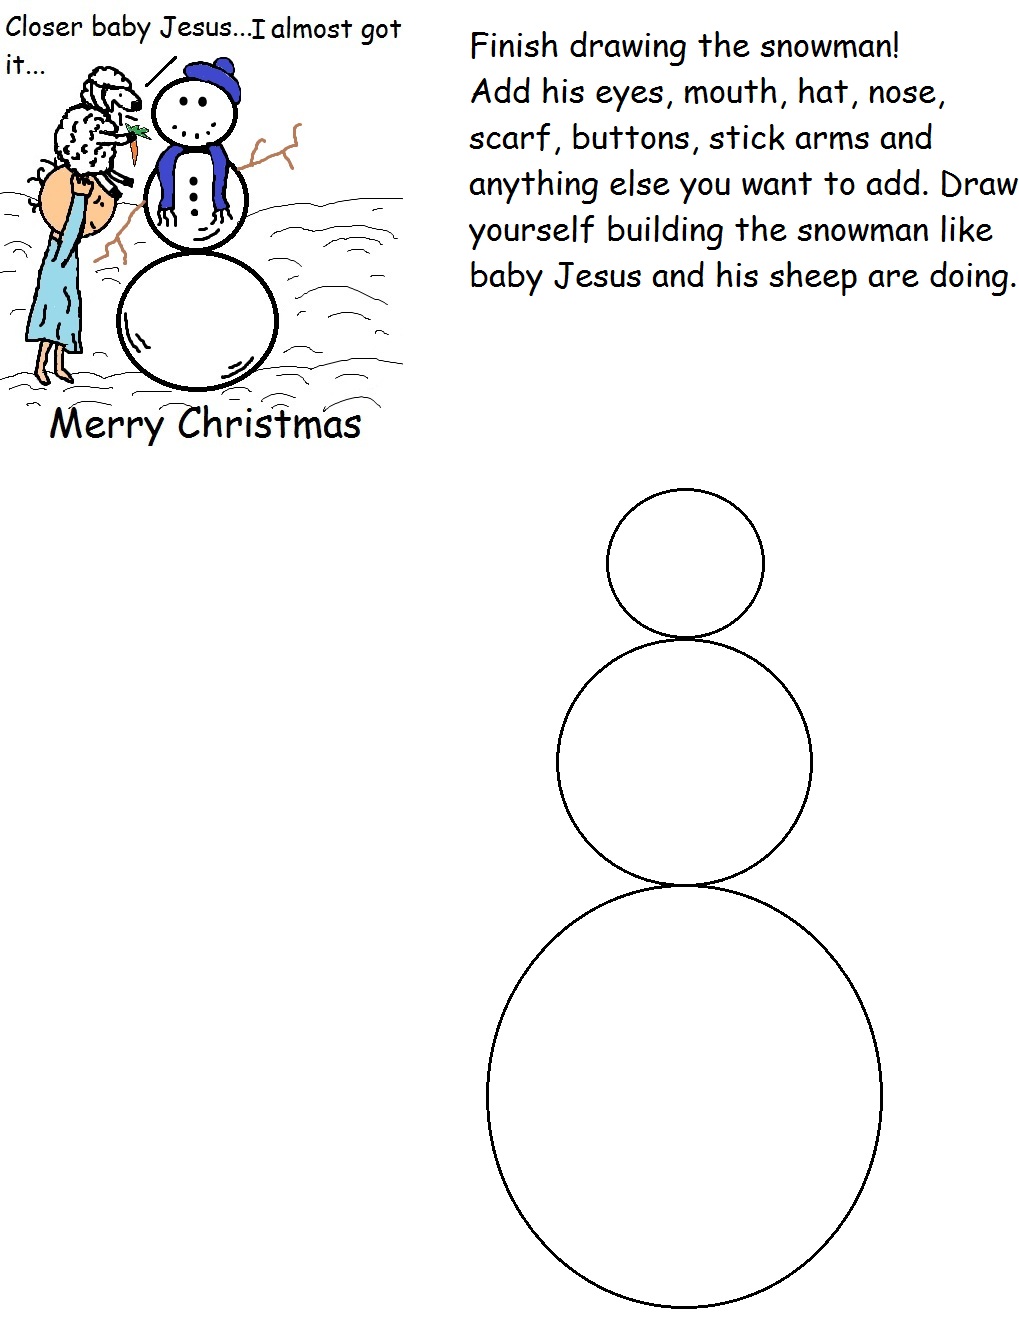 Free Christmas Snowman Activity Worksheet For Preschool Kids in Sunday School. Finish Drawing The Snowman Printable Template by Church House Collection. Use with Free Christmas Sunday School Lessons for kids that we offer.